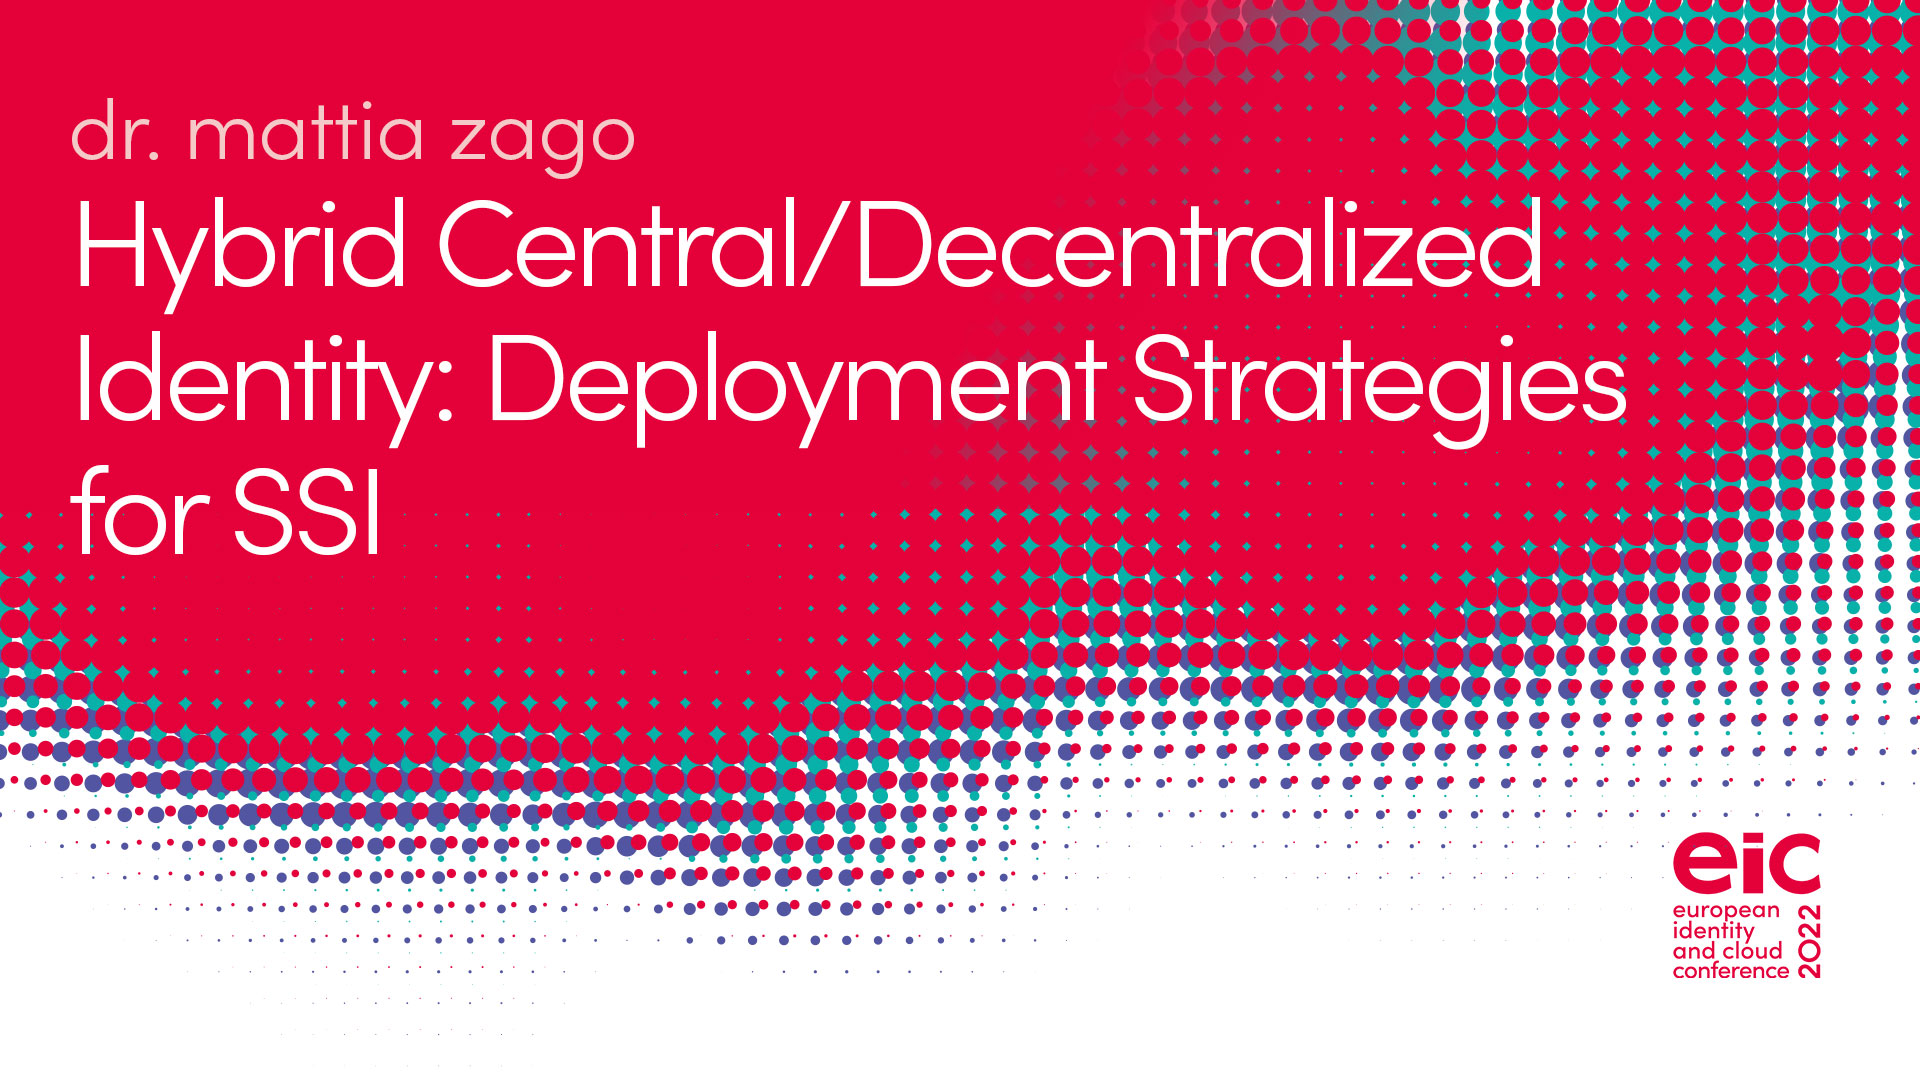 Hybrid Central/Decentralized Identity: Deployment Strategies for SSI